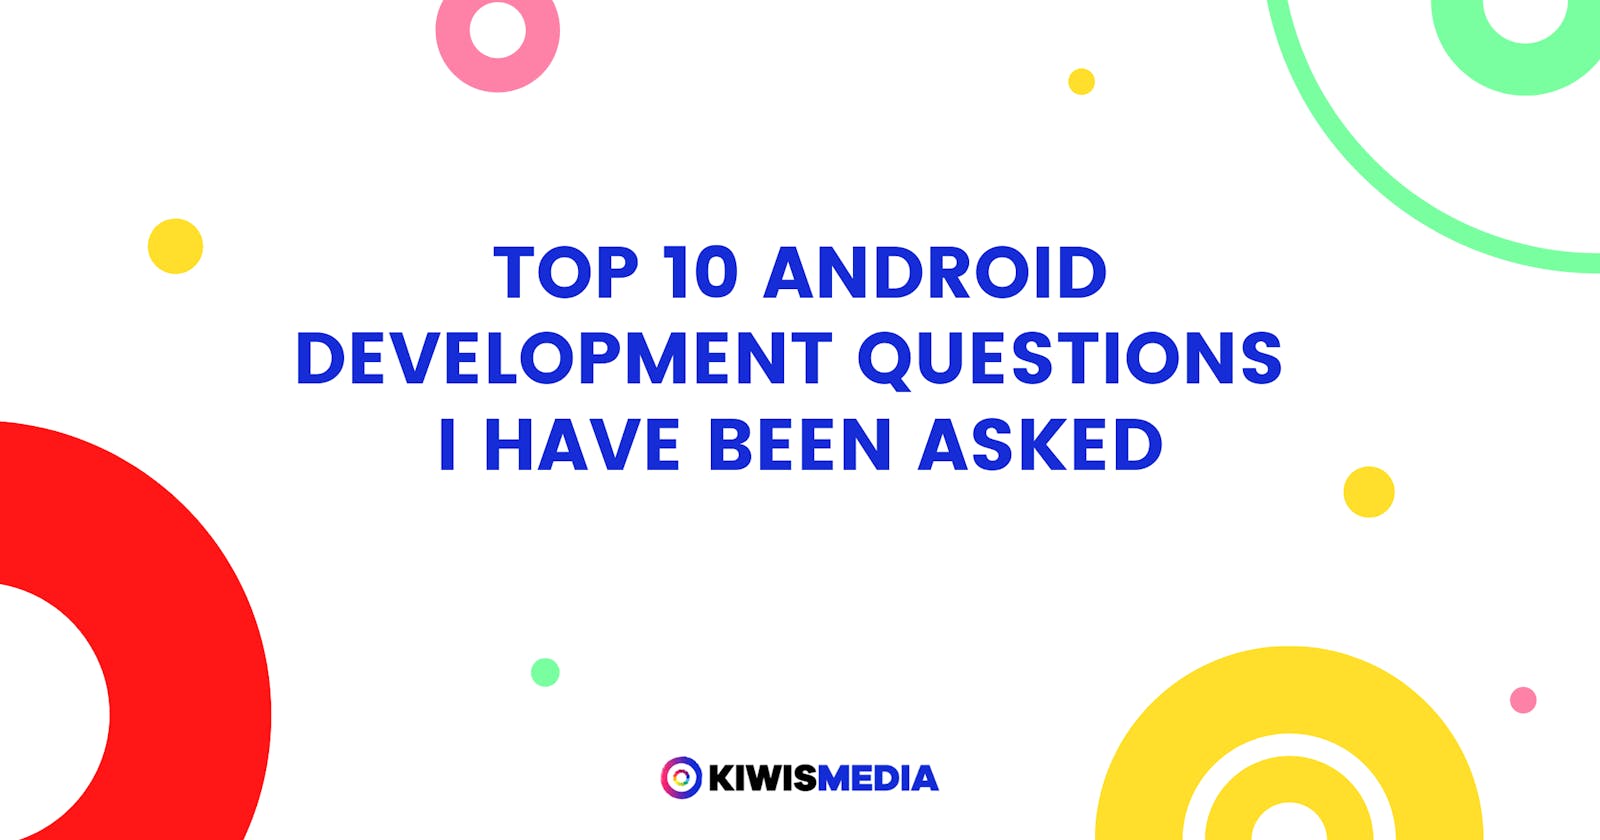 Top 10 Android Development Questions I have been asked